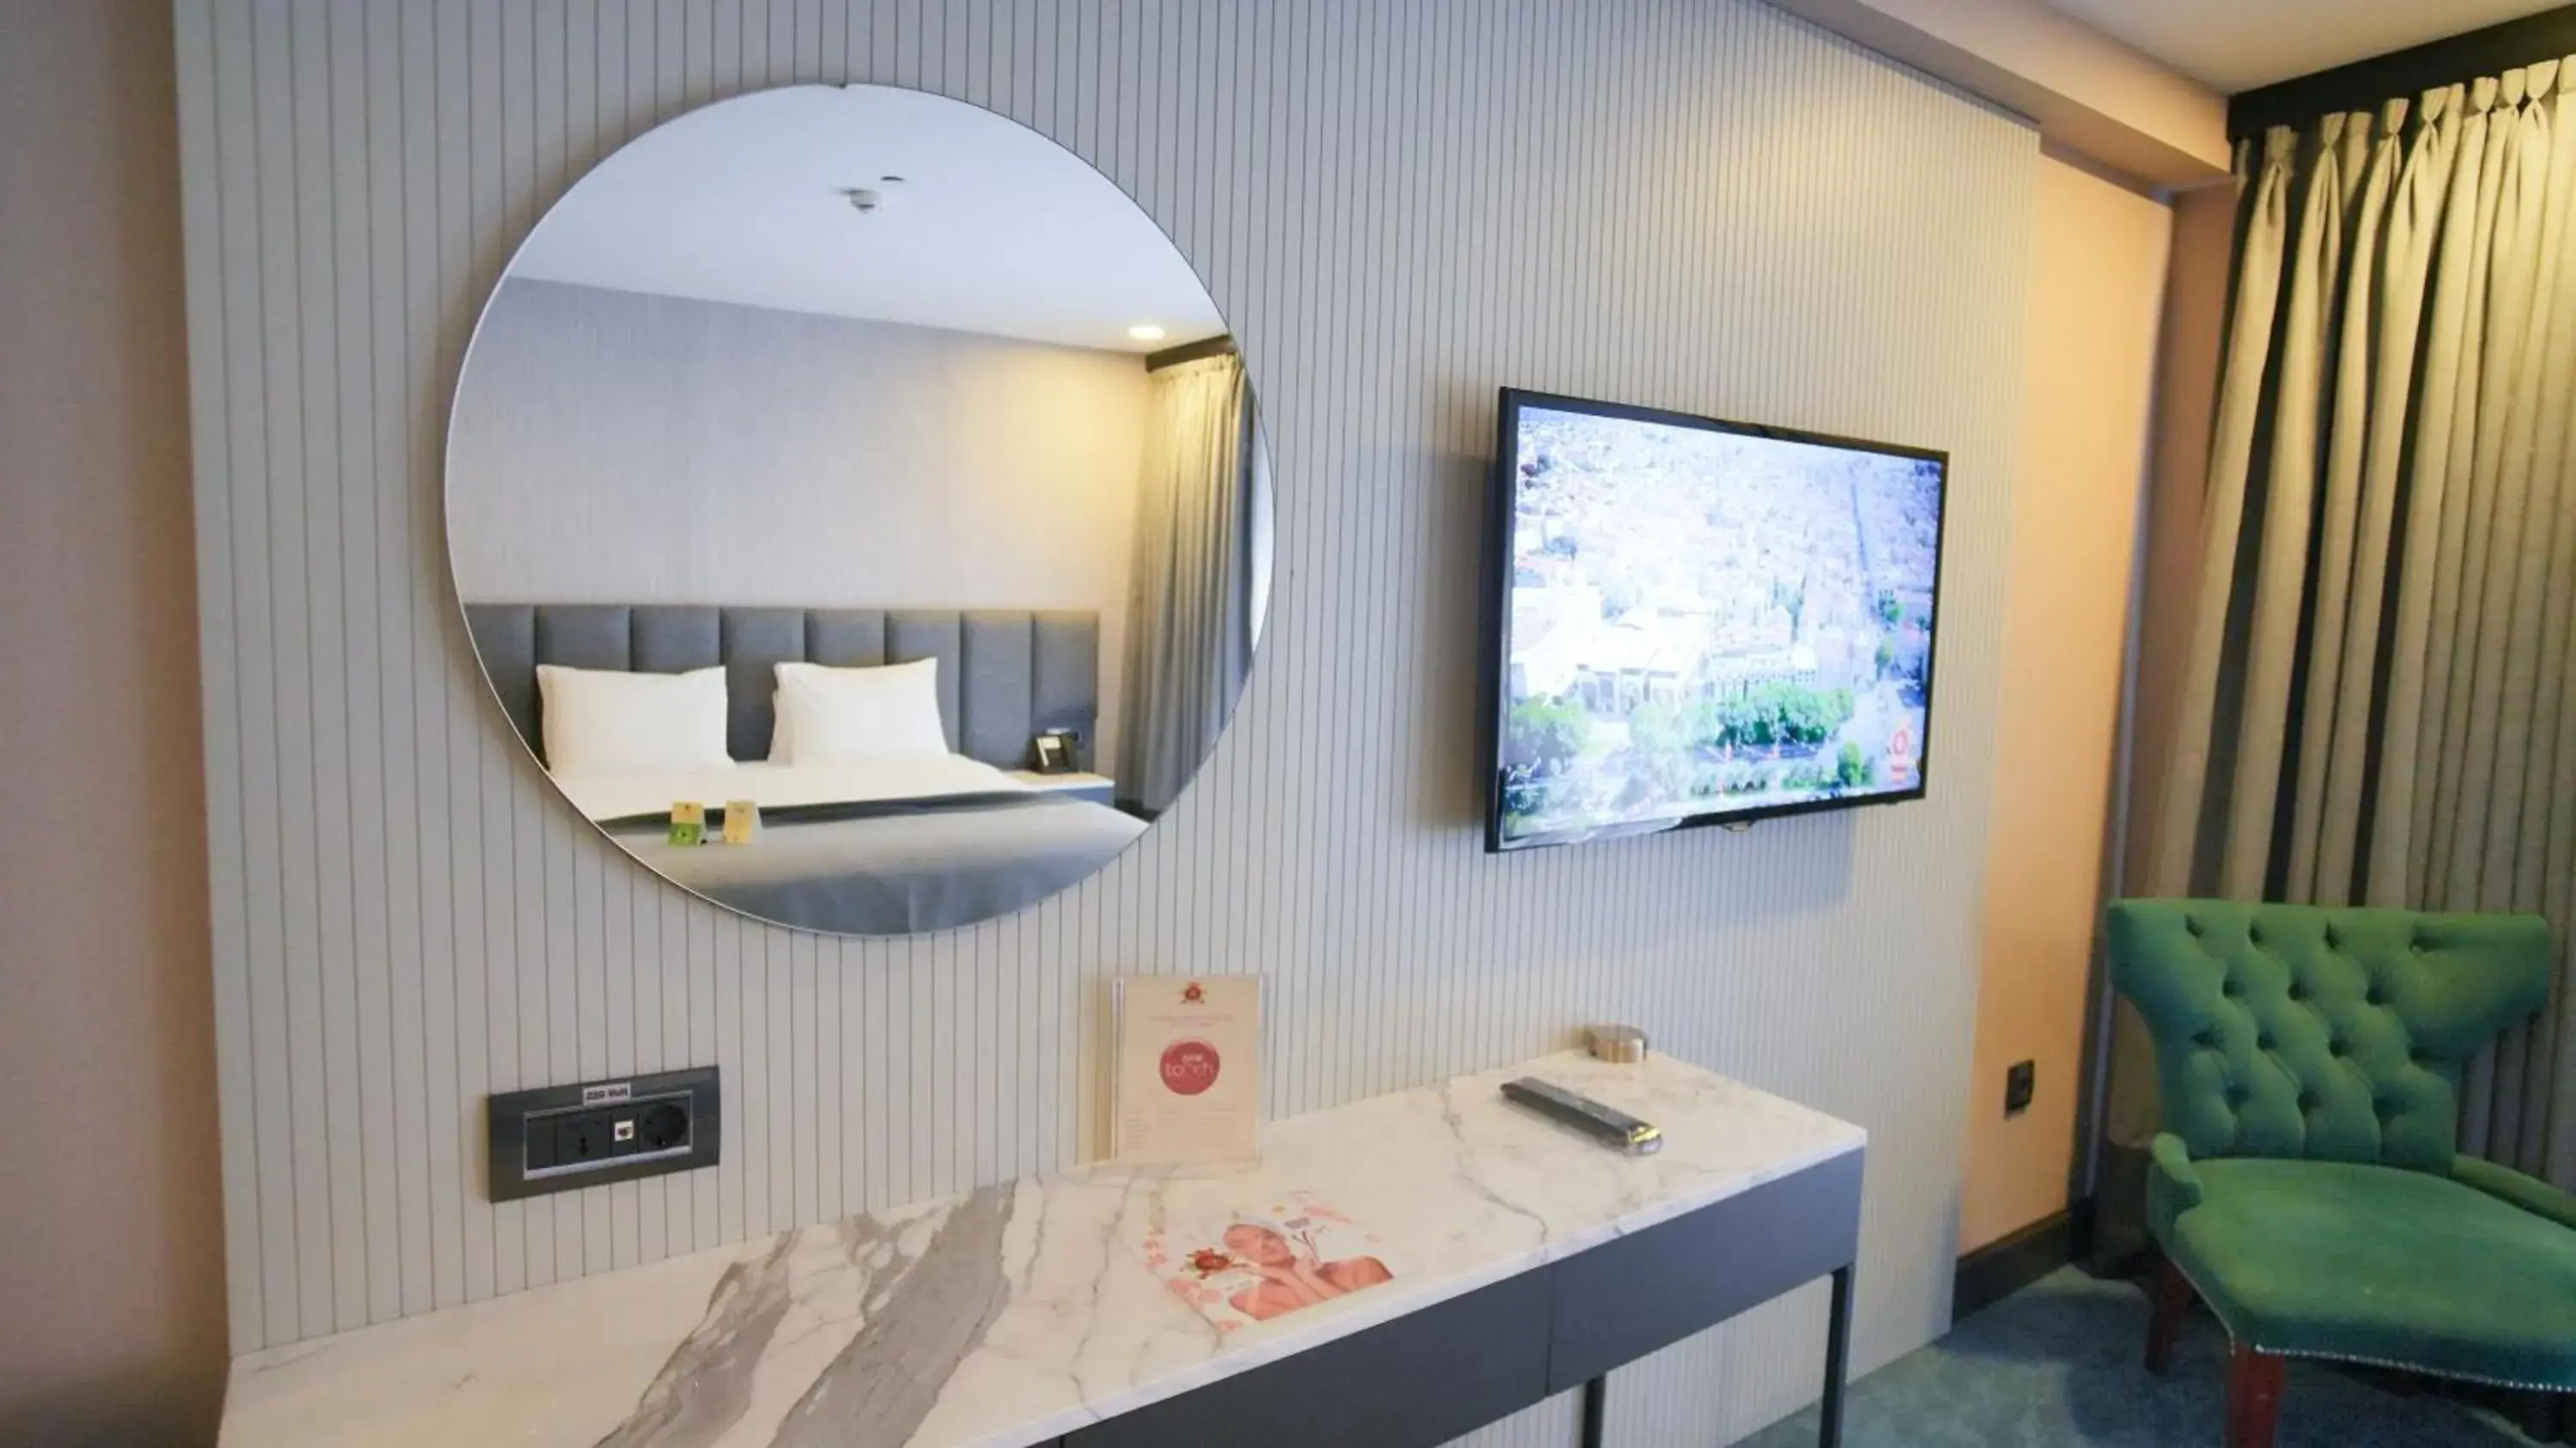 TV and multimedia, Bathroom in Dosso Dossi Hotels Old City